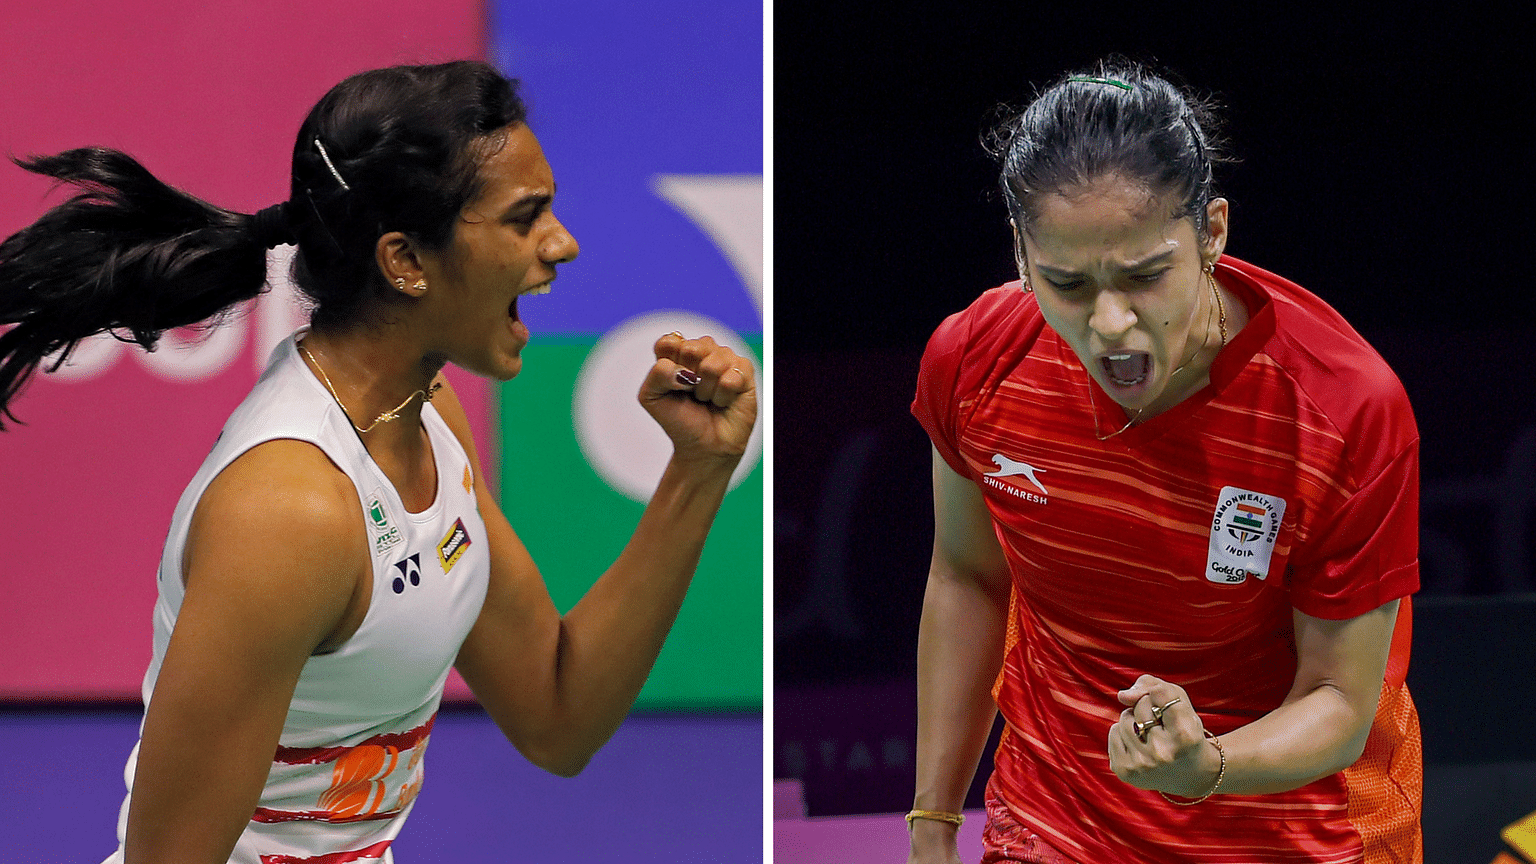 While Saina Nehwal won the Indian Open in 2015, Sindhu was crowned champion in 2017.